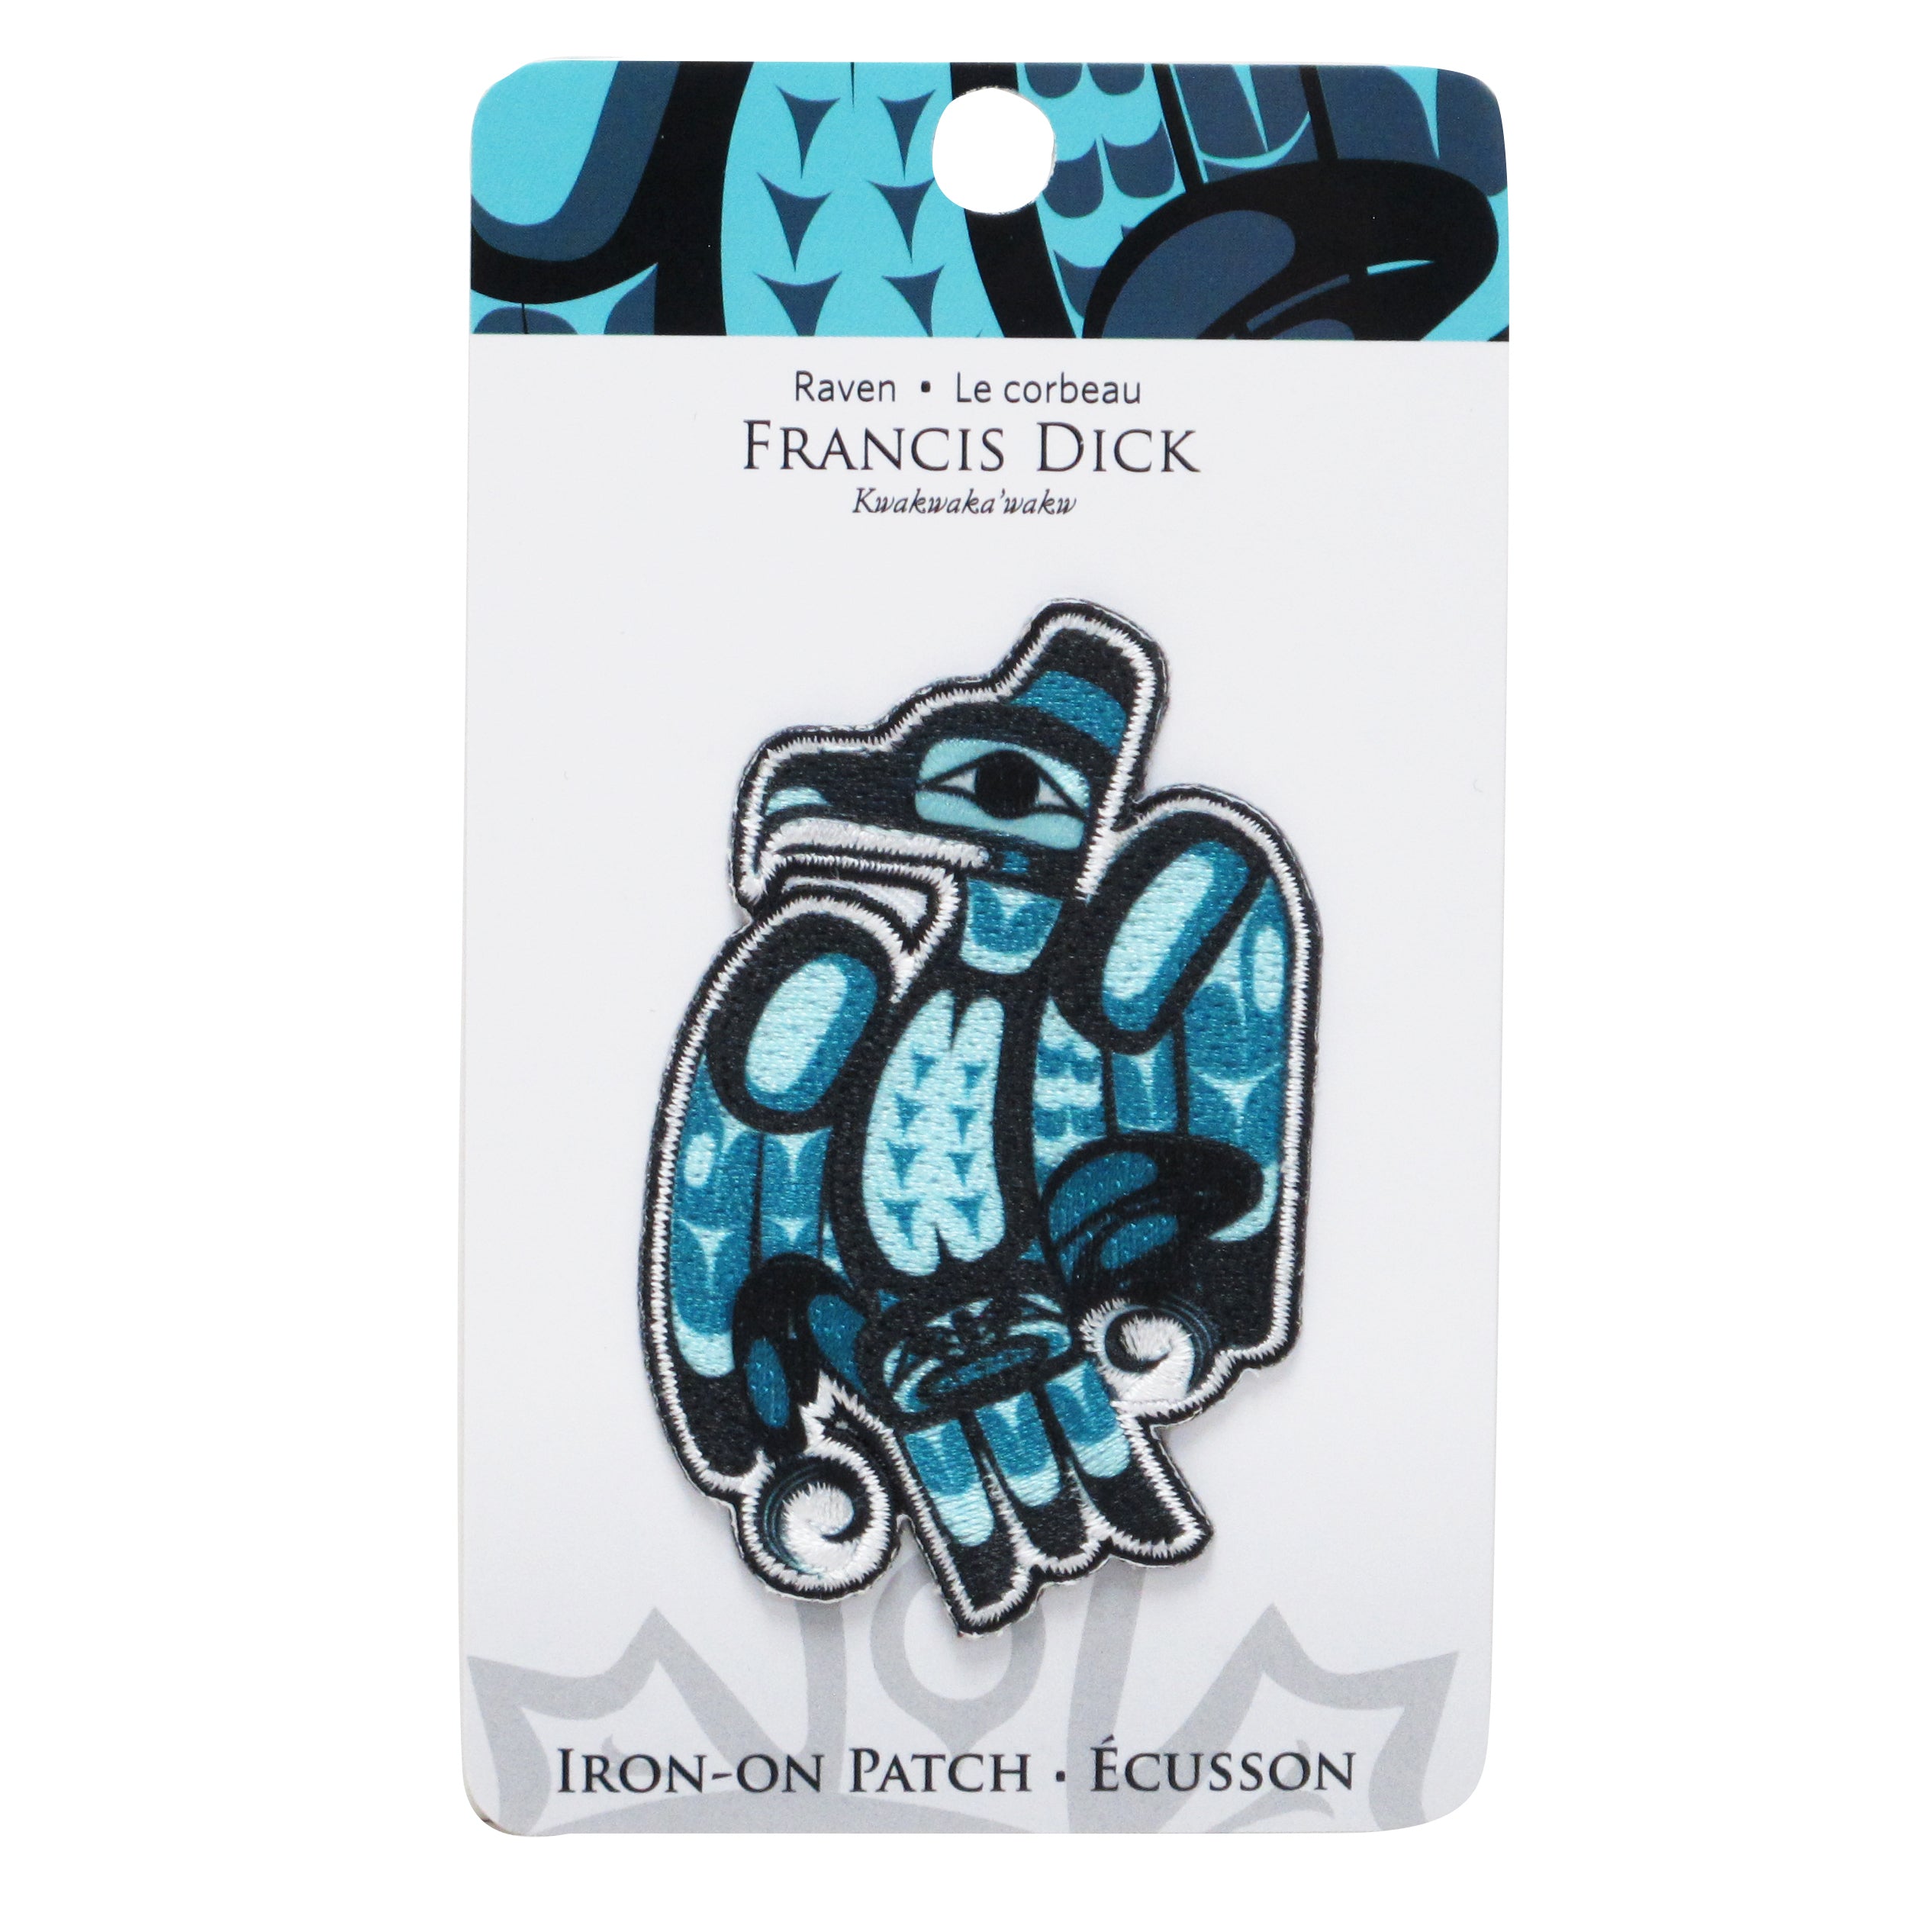 Francis Dick Raven Iron-on Patch